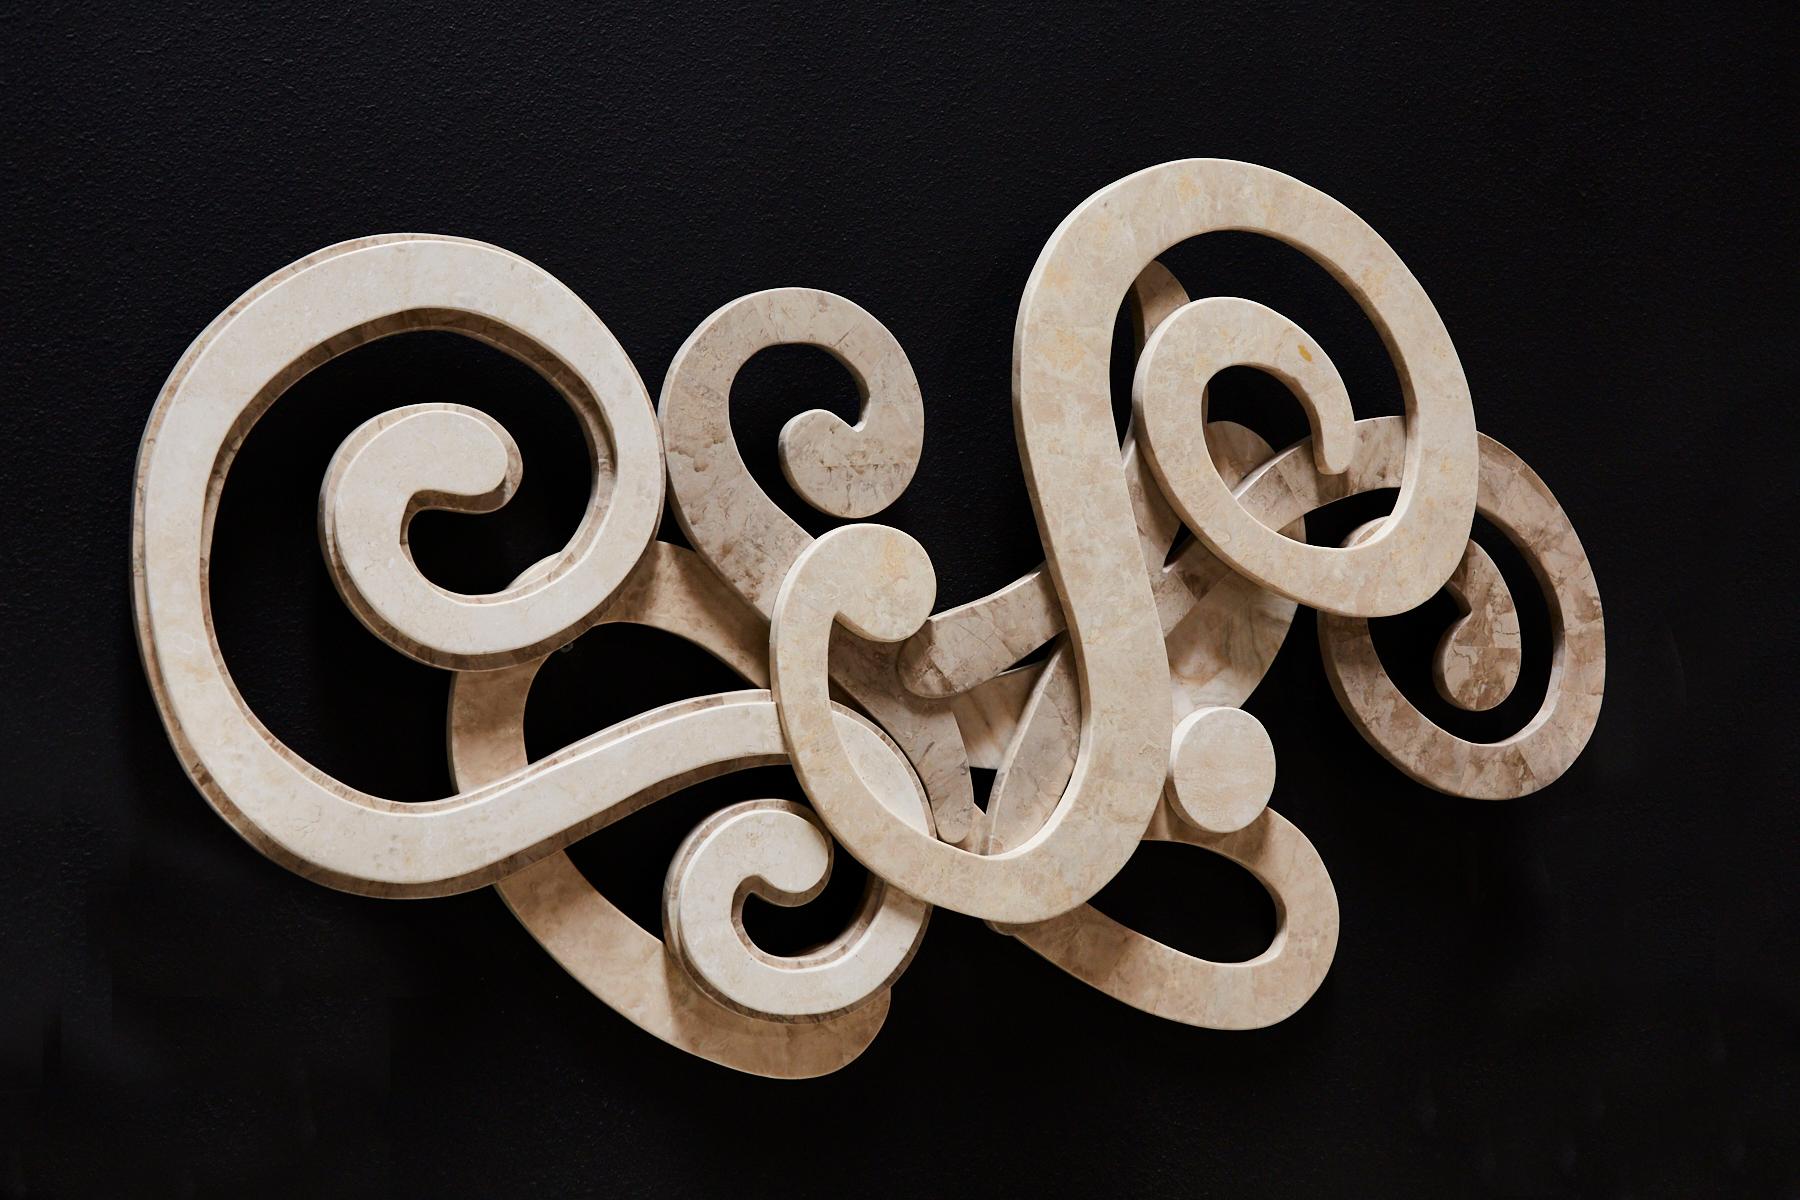 Swirled abstract wall sculpture executed in handcut and inlaid tessellated stone, including Cantor stone, Beige Fossil stone and Woodstone for a neutral color palette.

All furnishings are made from 100% natural Fossil Stone or Seashell inlay,